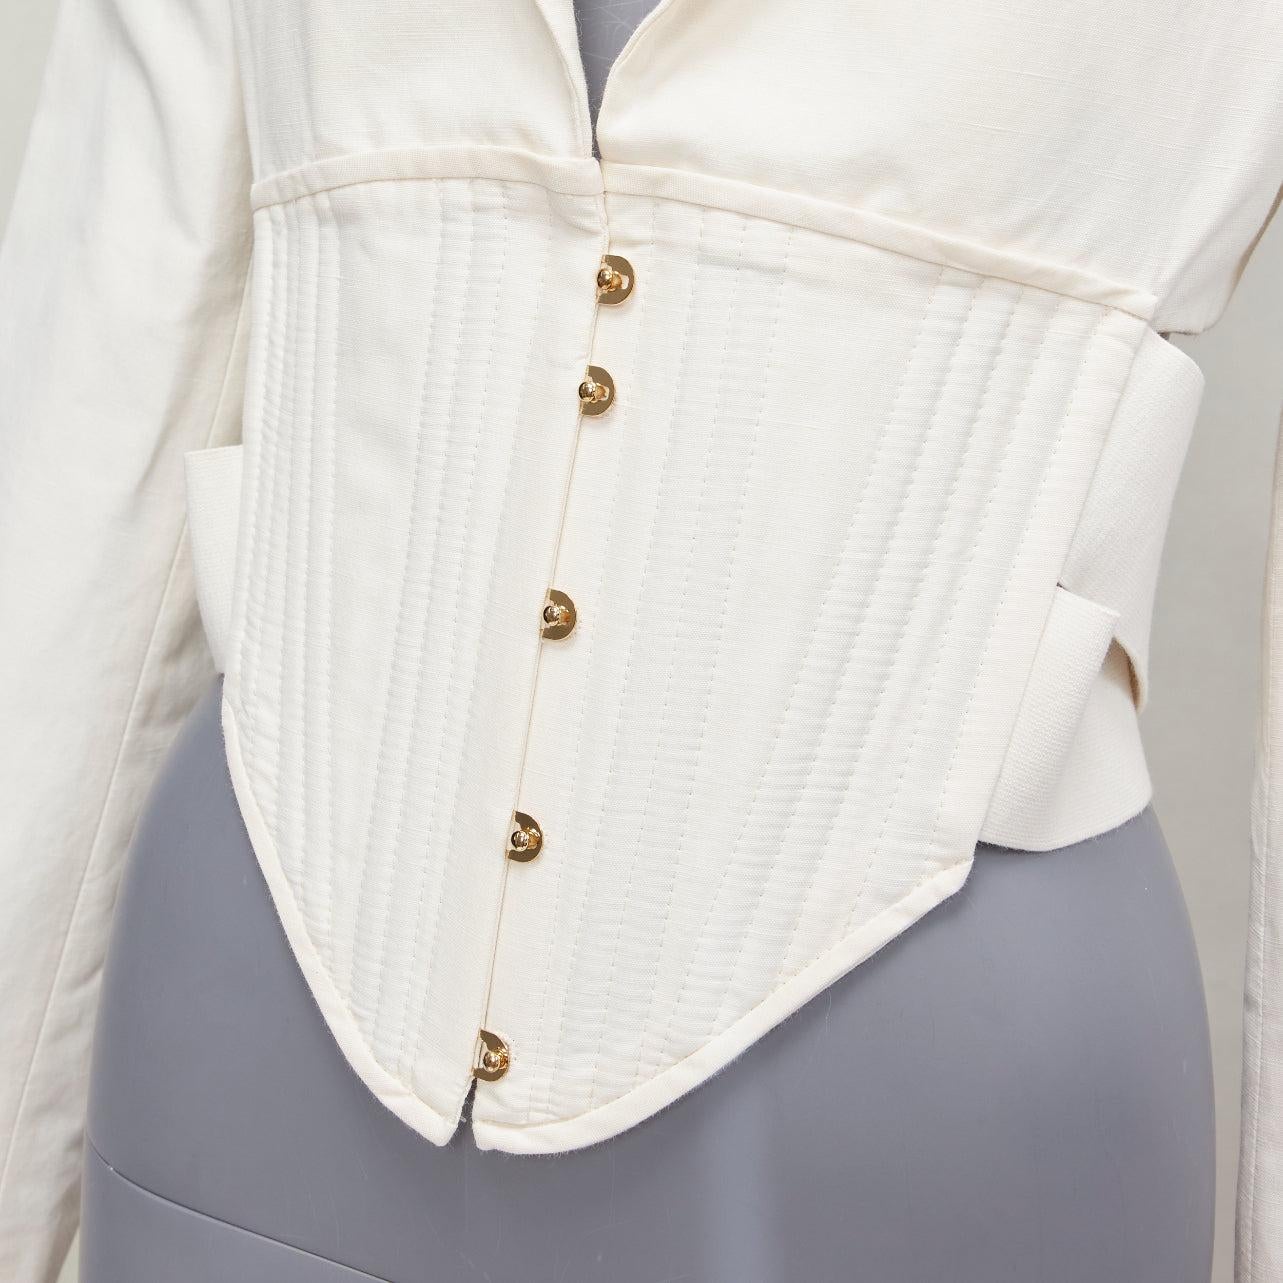 STELLA MCCARTNEY cream boned corset cropped cut out blazer jacket IT40 S
Reference: NKLL/A00179
Brand: Stella McCartney
Designer: Stella McCartney
Material: Feels like linen
Color: Cream
Pattern: Solid
Closure: Hook & Bar
Lining: Cream Fabric
Extra